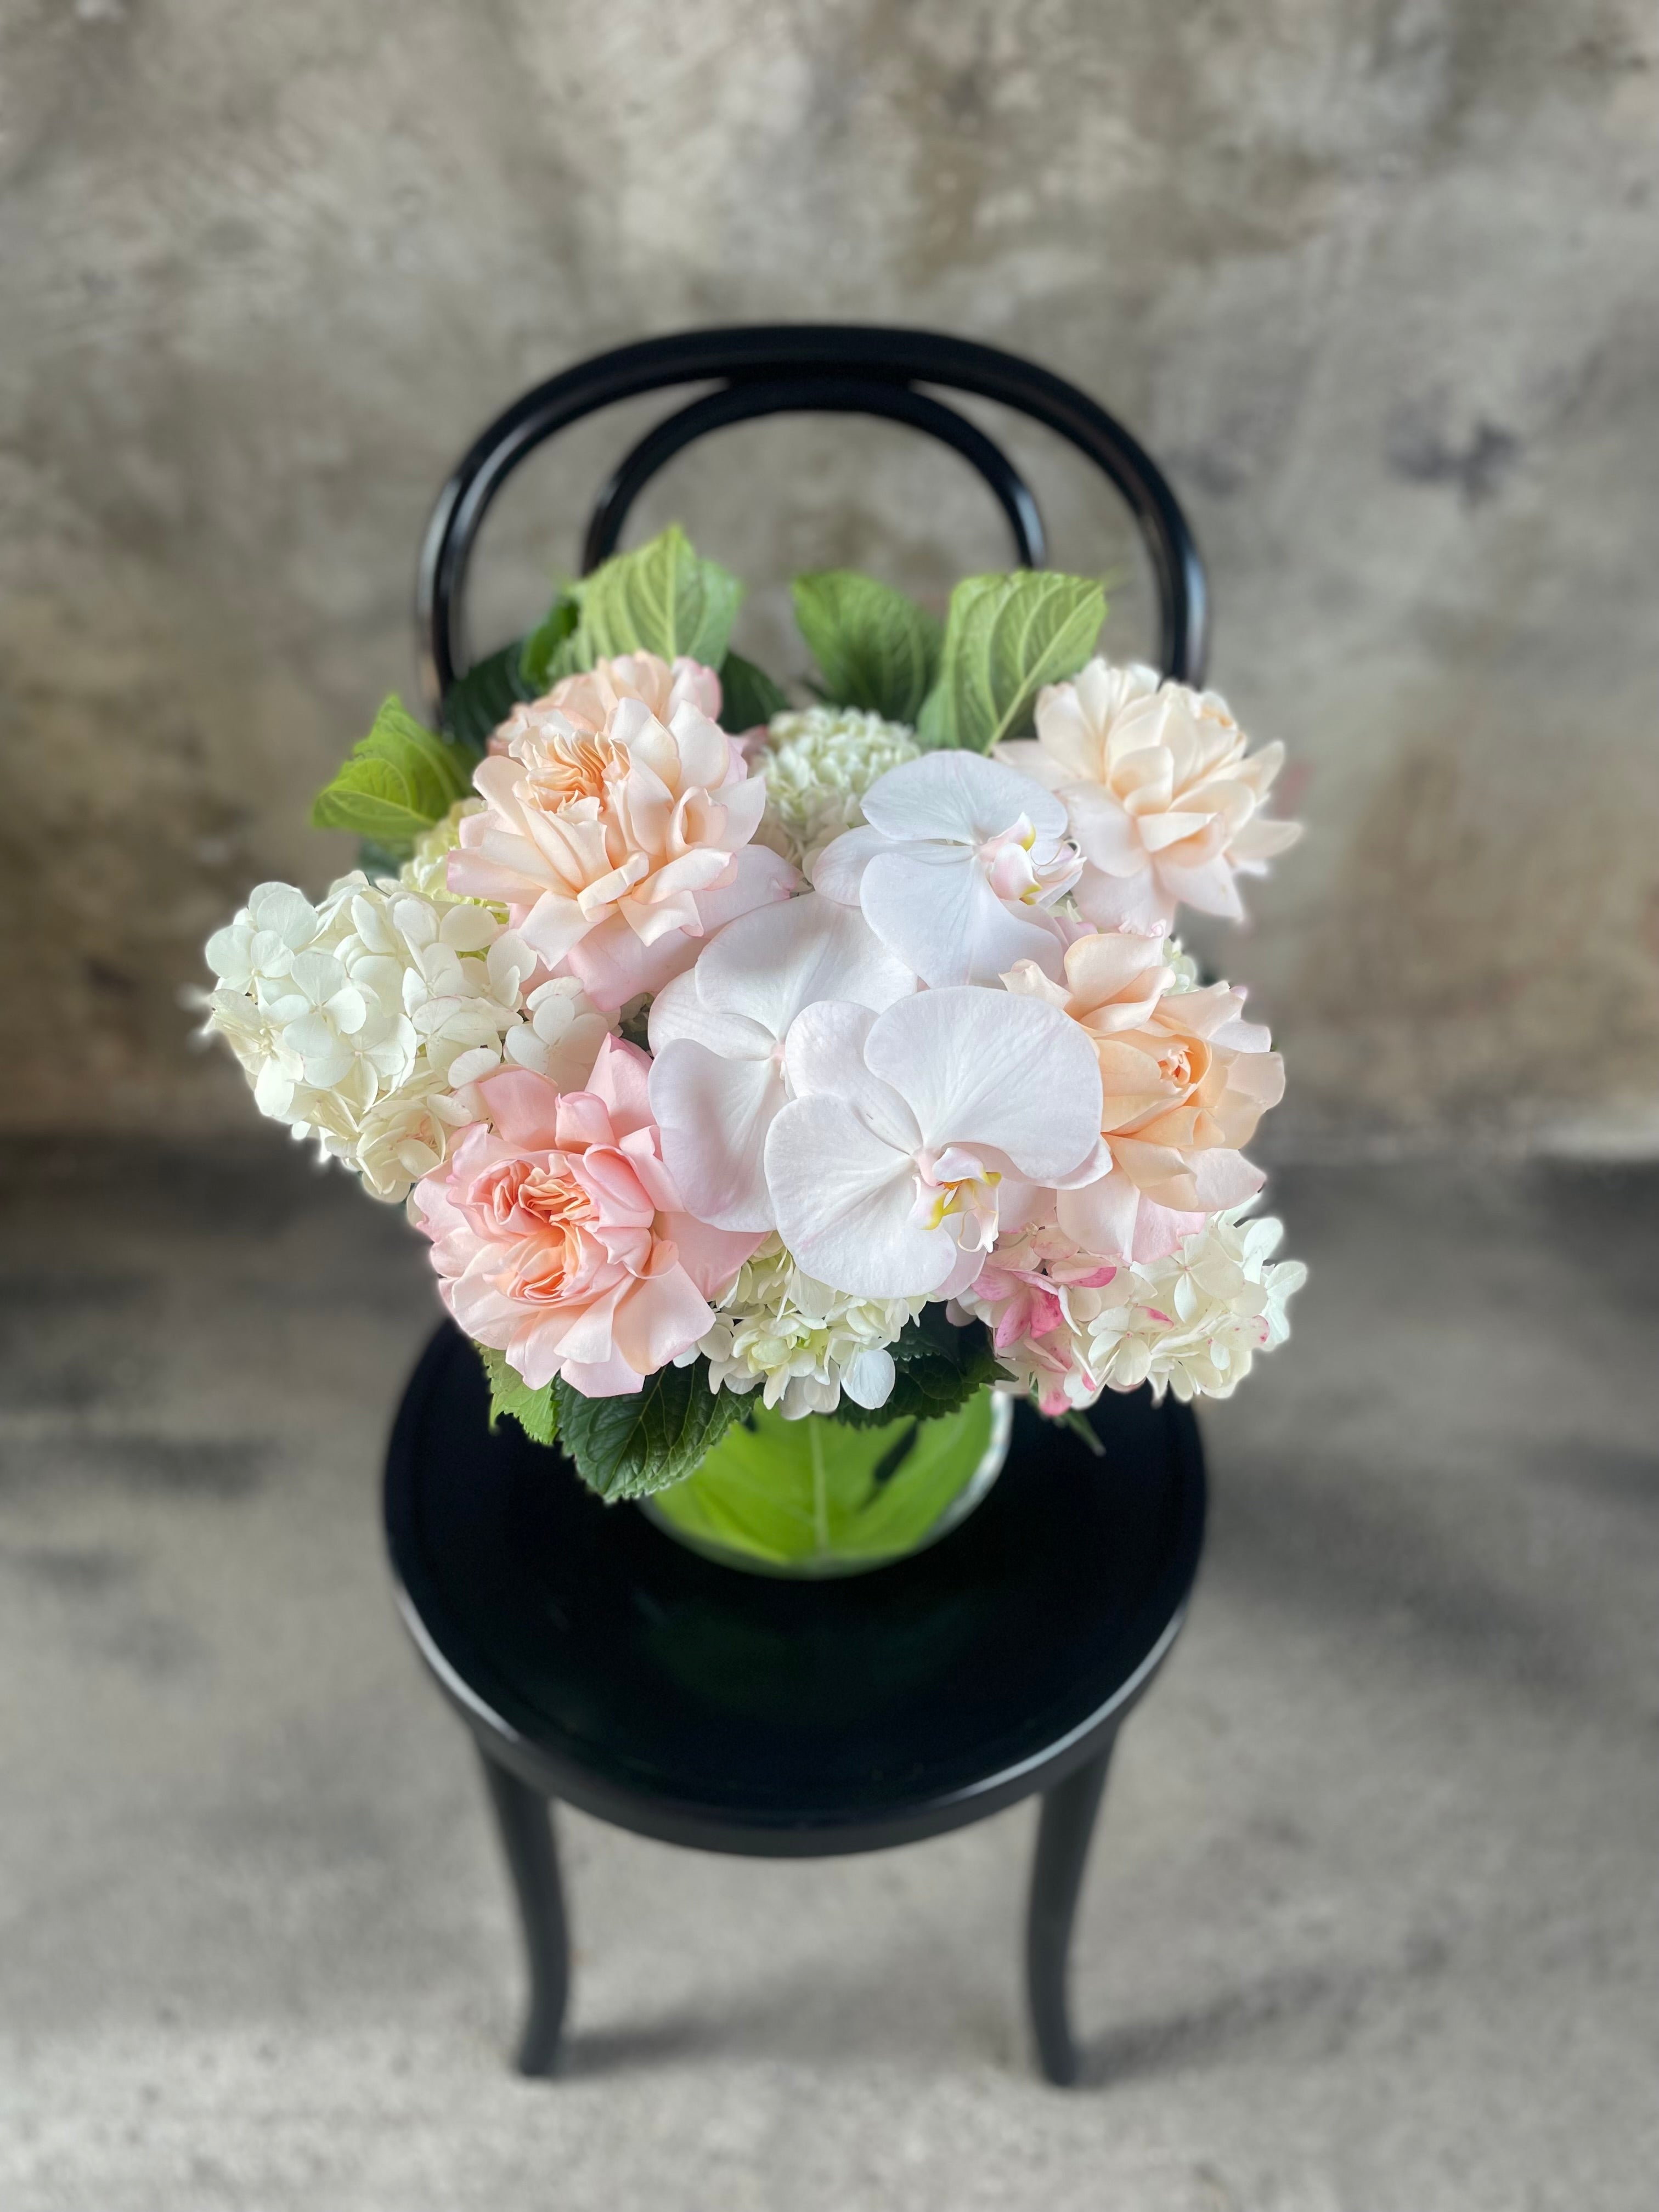 Above angle of Blush white and green flowers displayed in a leaf lined tapered vase, sitting on a black bentwood chair with a concrete wall background.